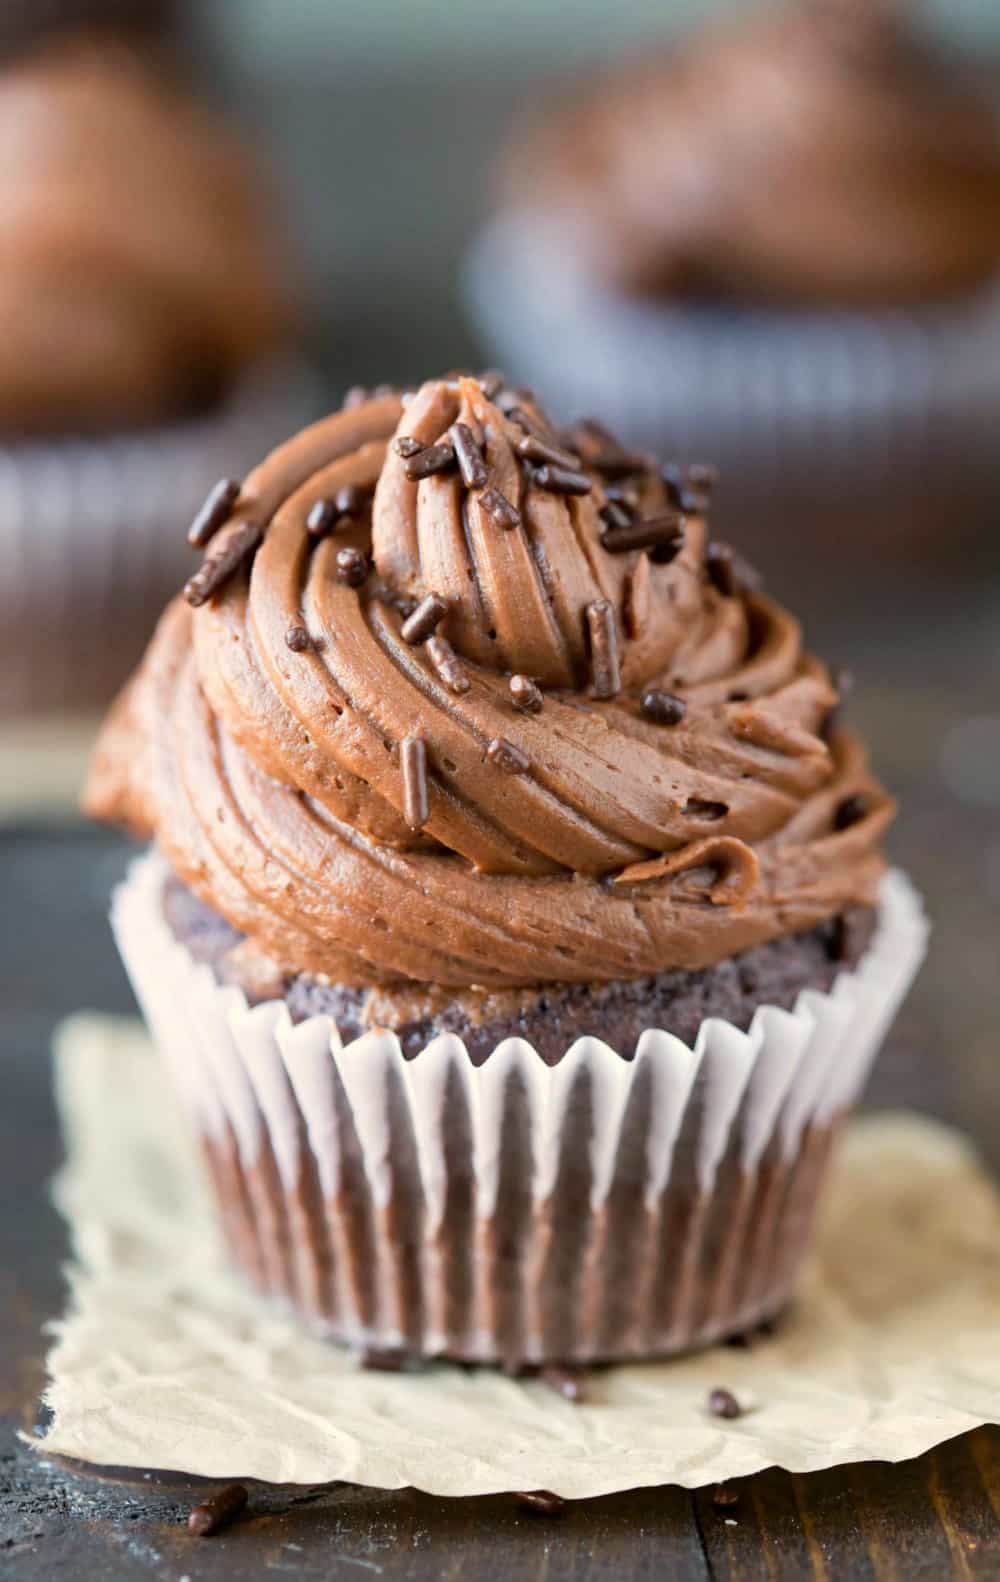 Chocolate Buttercream Frosting - I Heart Eating